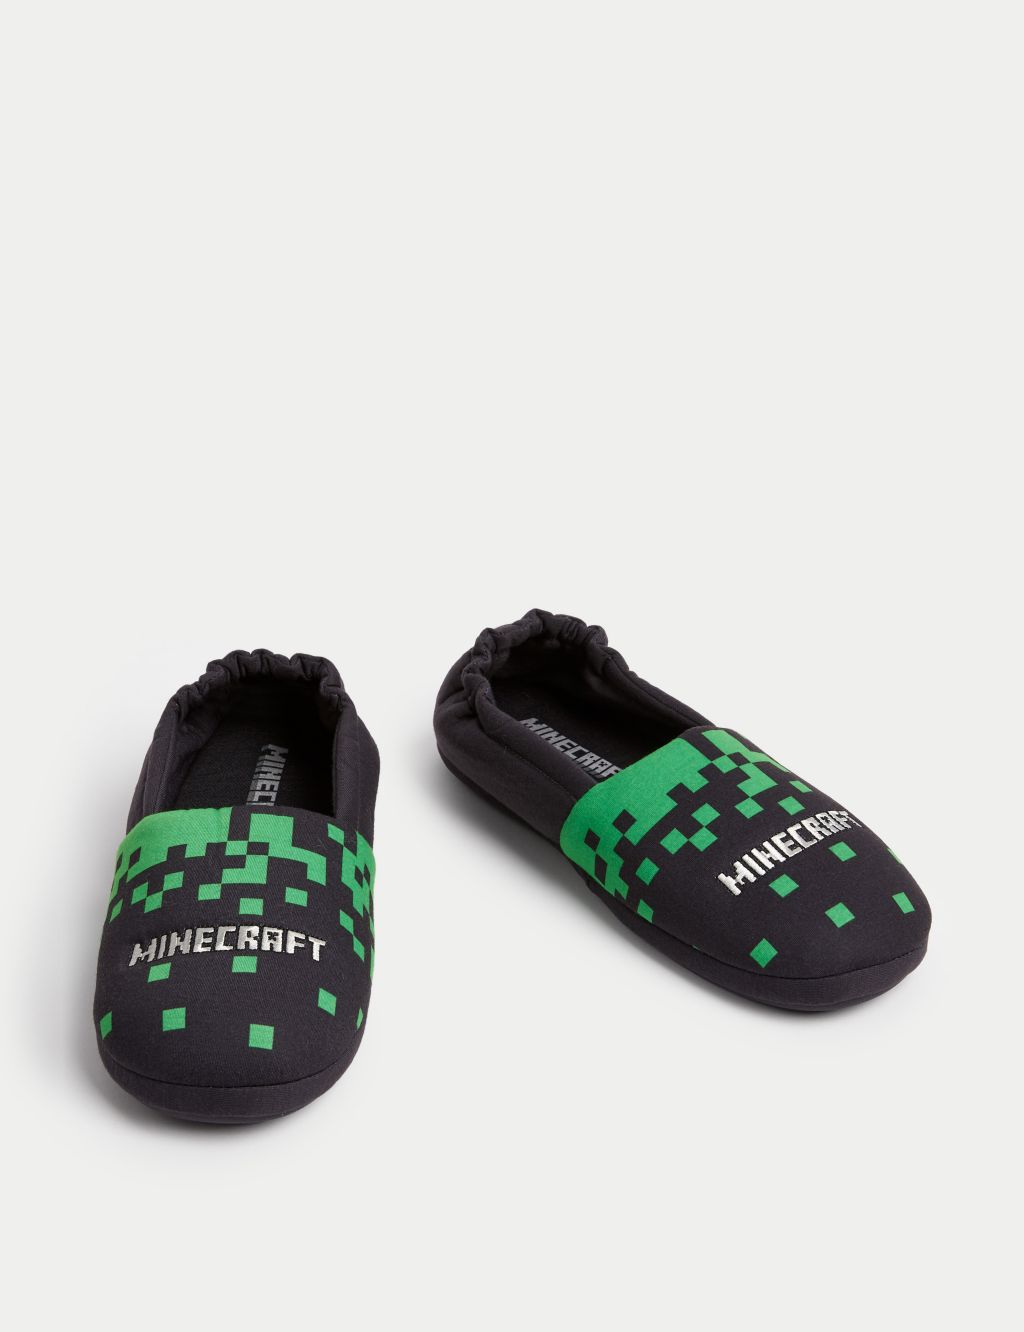 Kids' Minecraft™ Slippers (13 Small - 7 Large) image 2